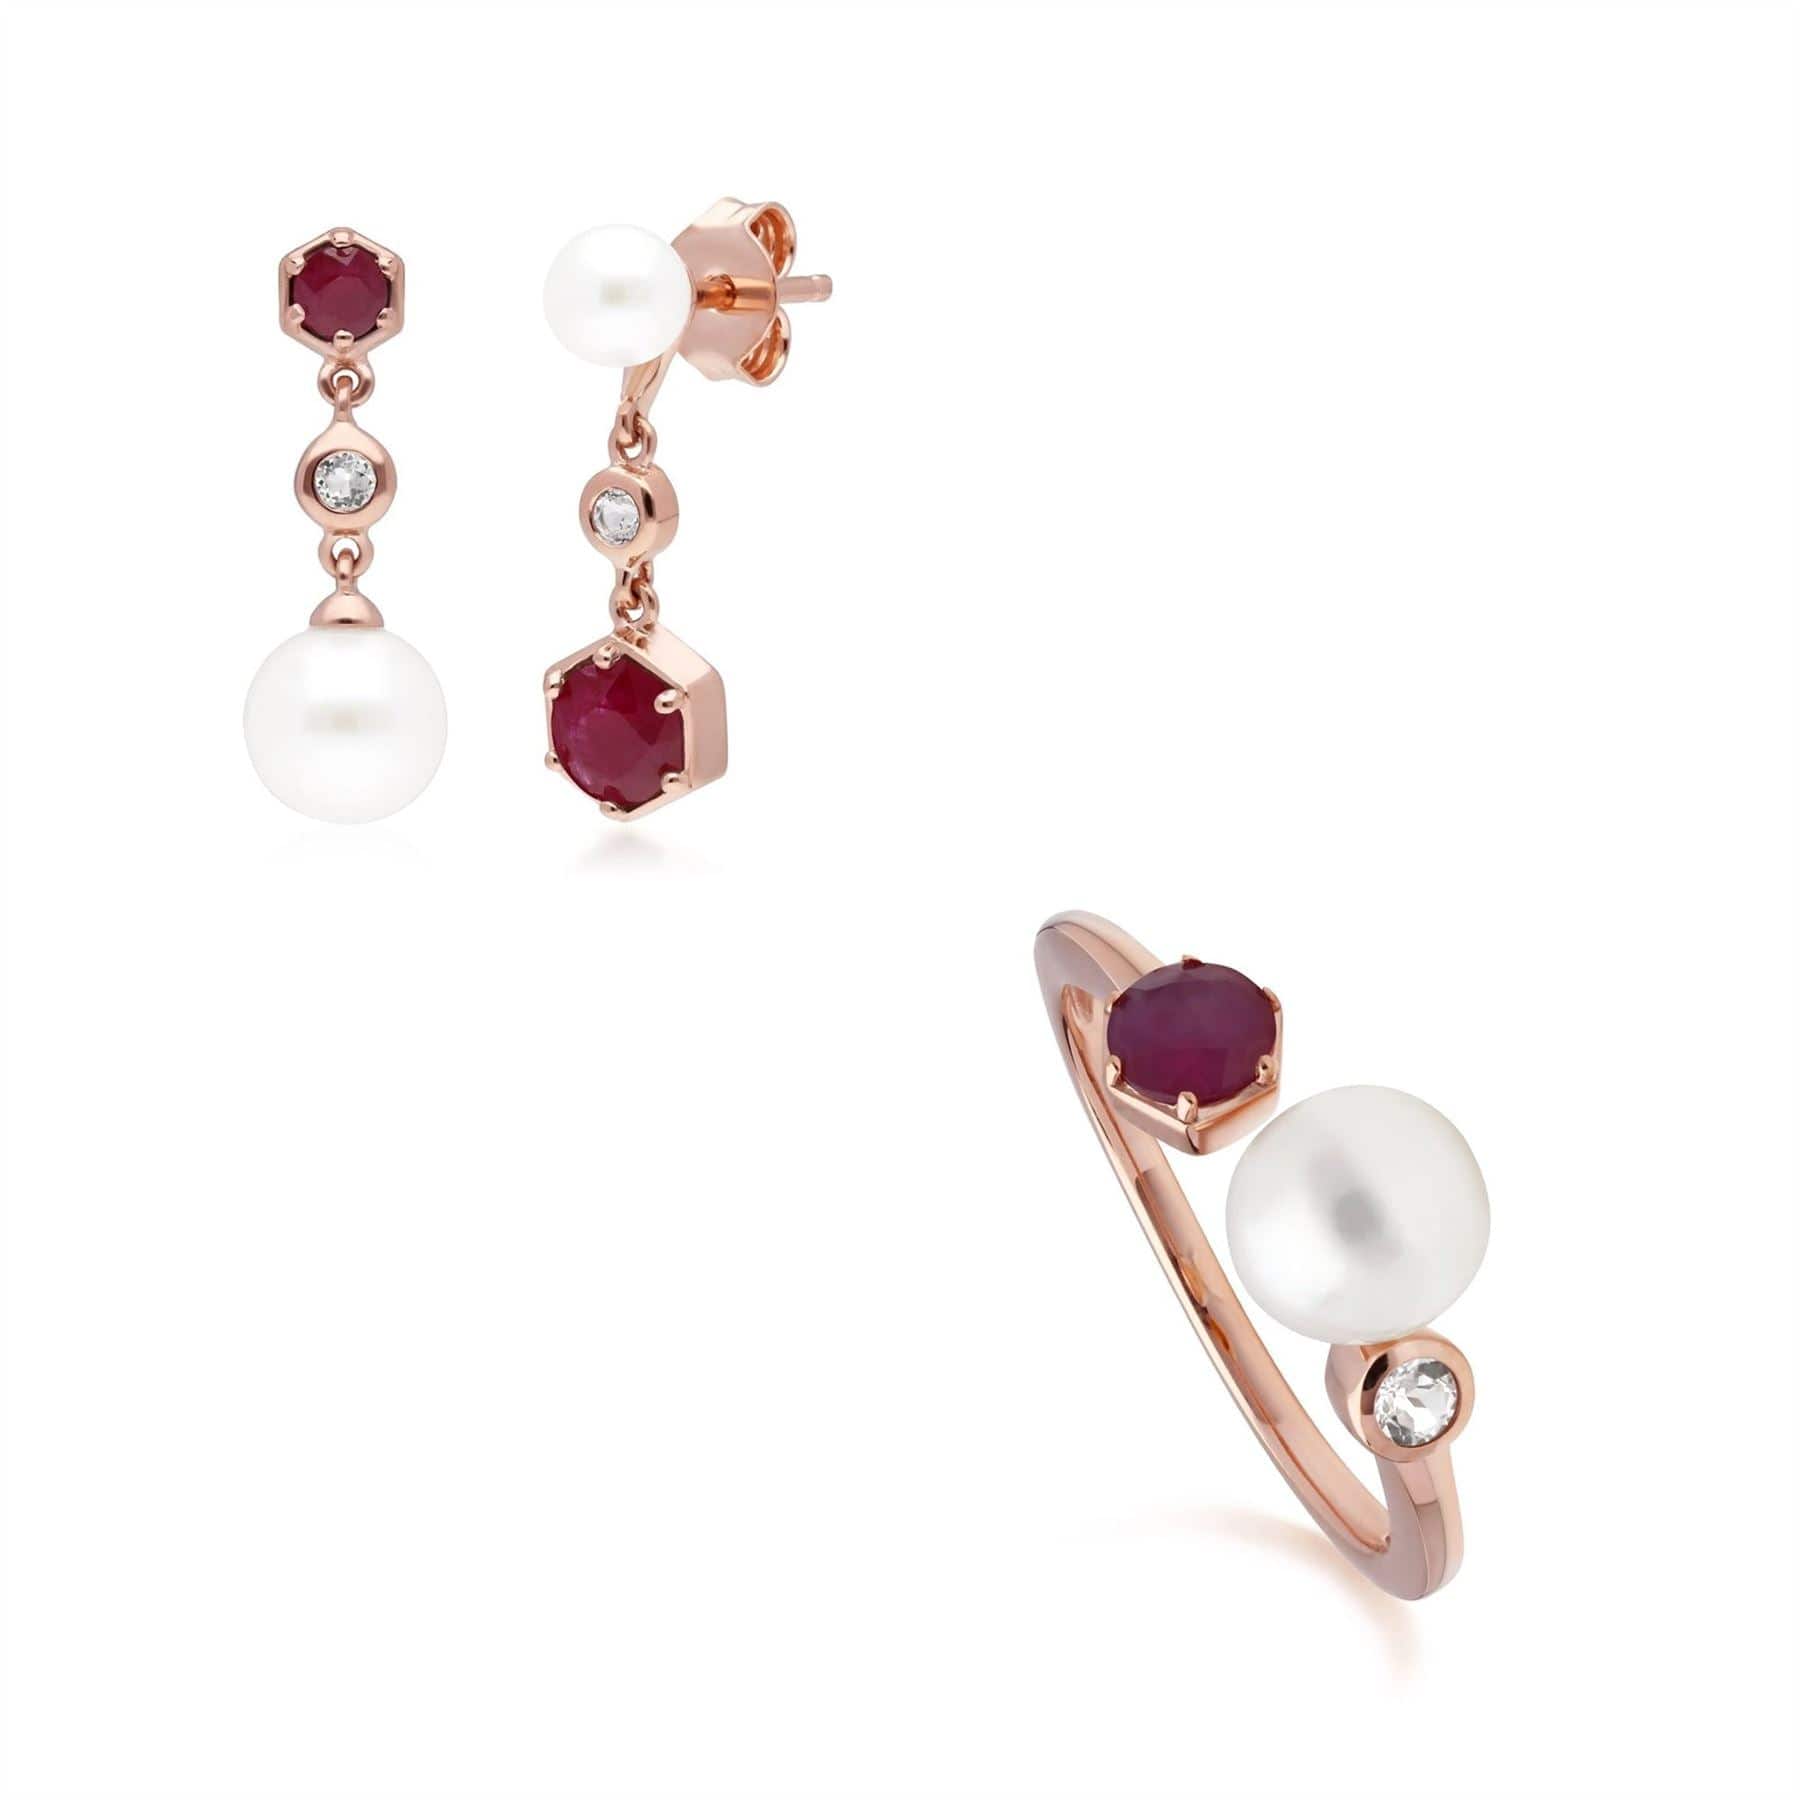 270E030302925-270R058802925 Modern Pearl, Ruby & Topaz Earring & Ring Set in Rose Gold Plated Silver 1